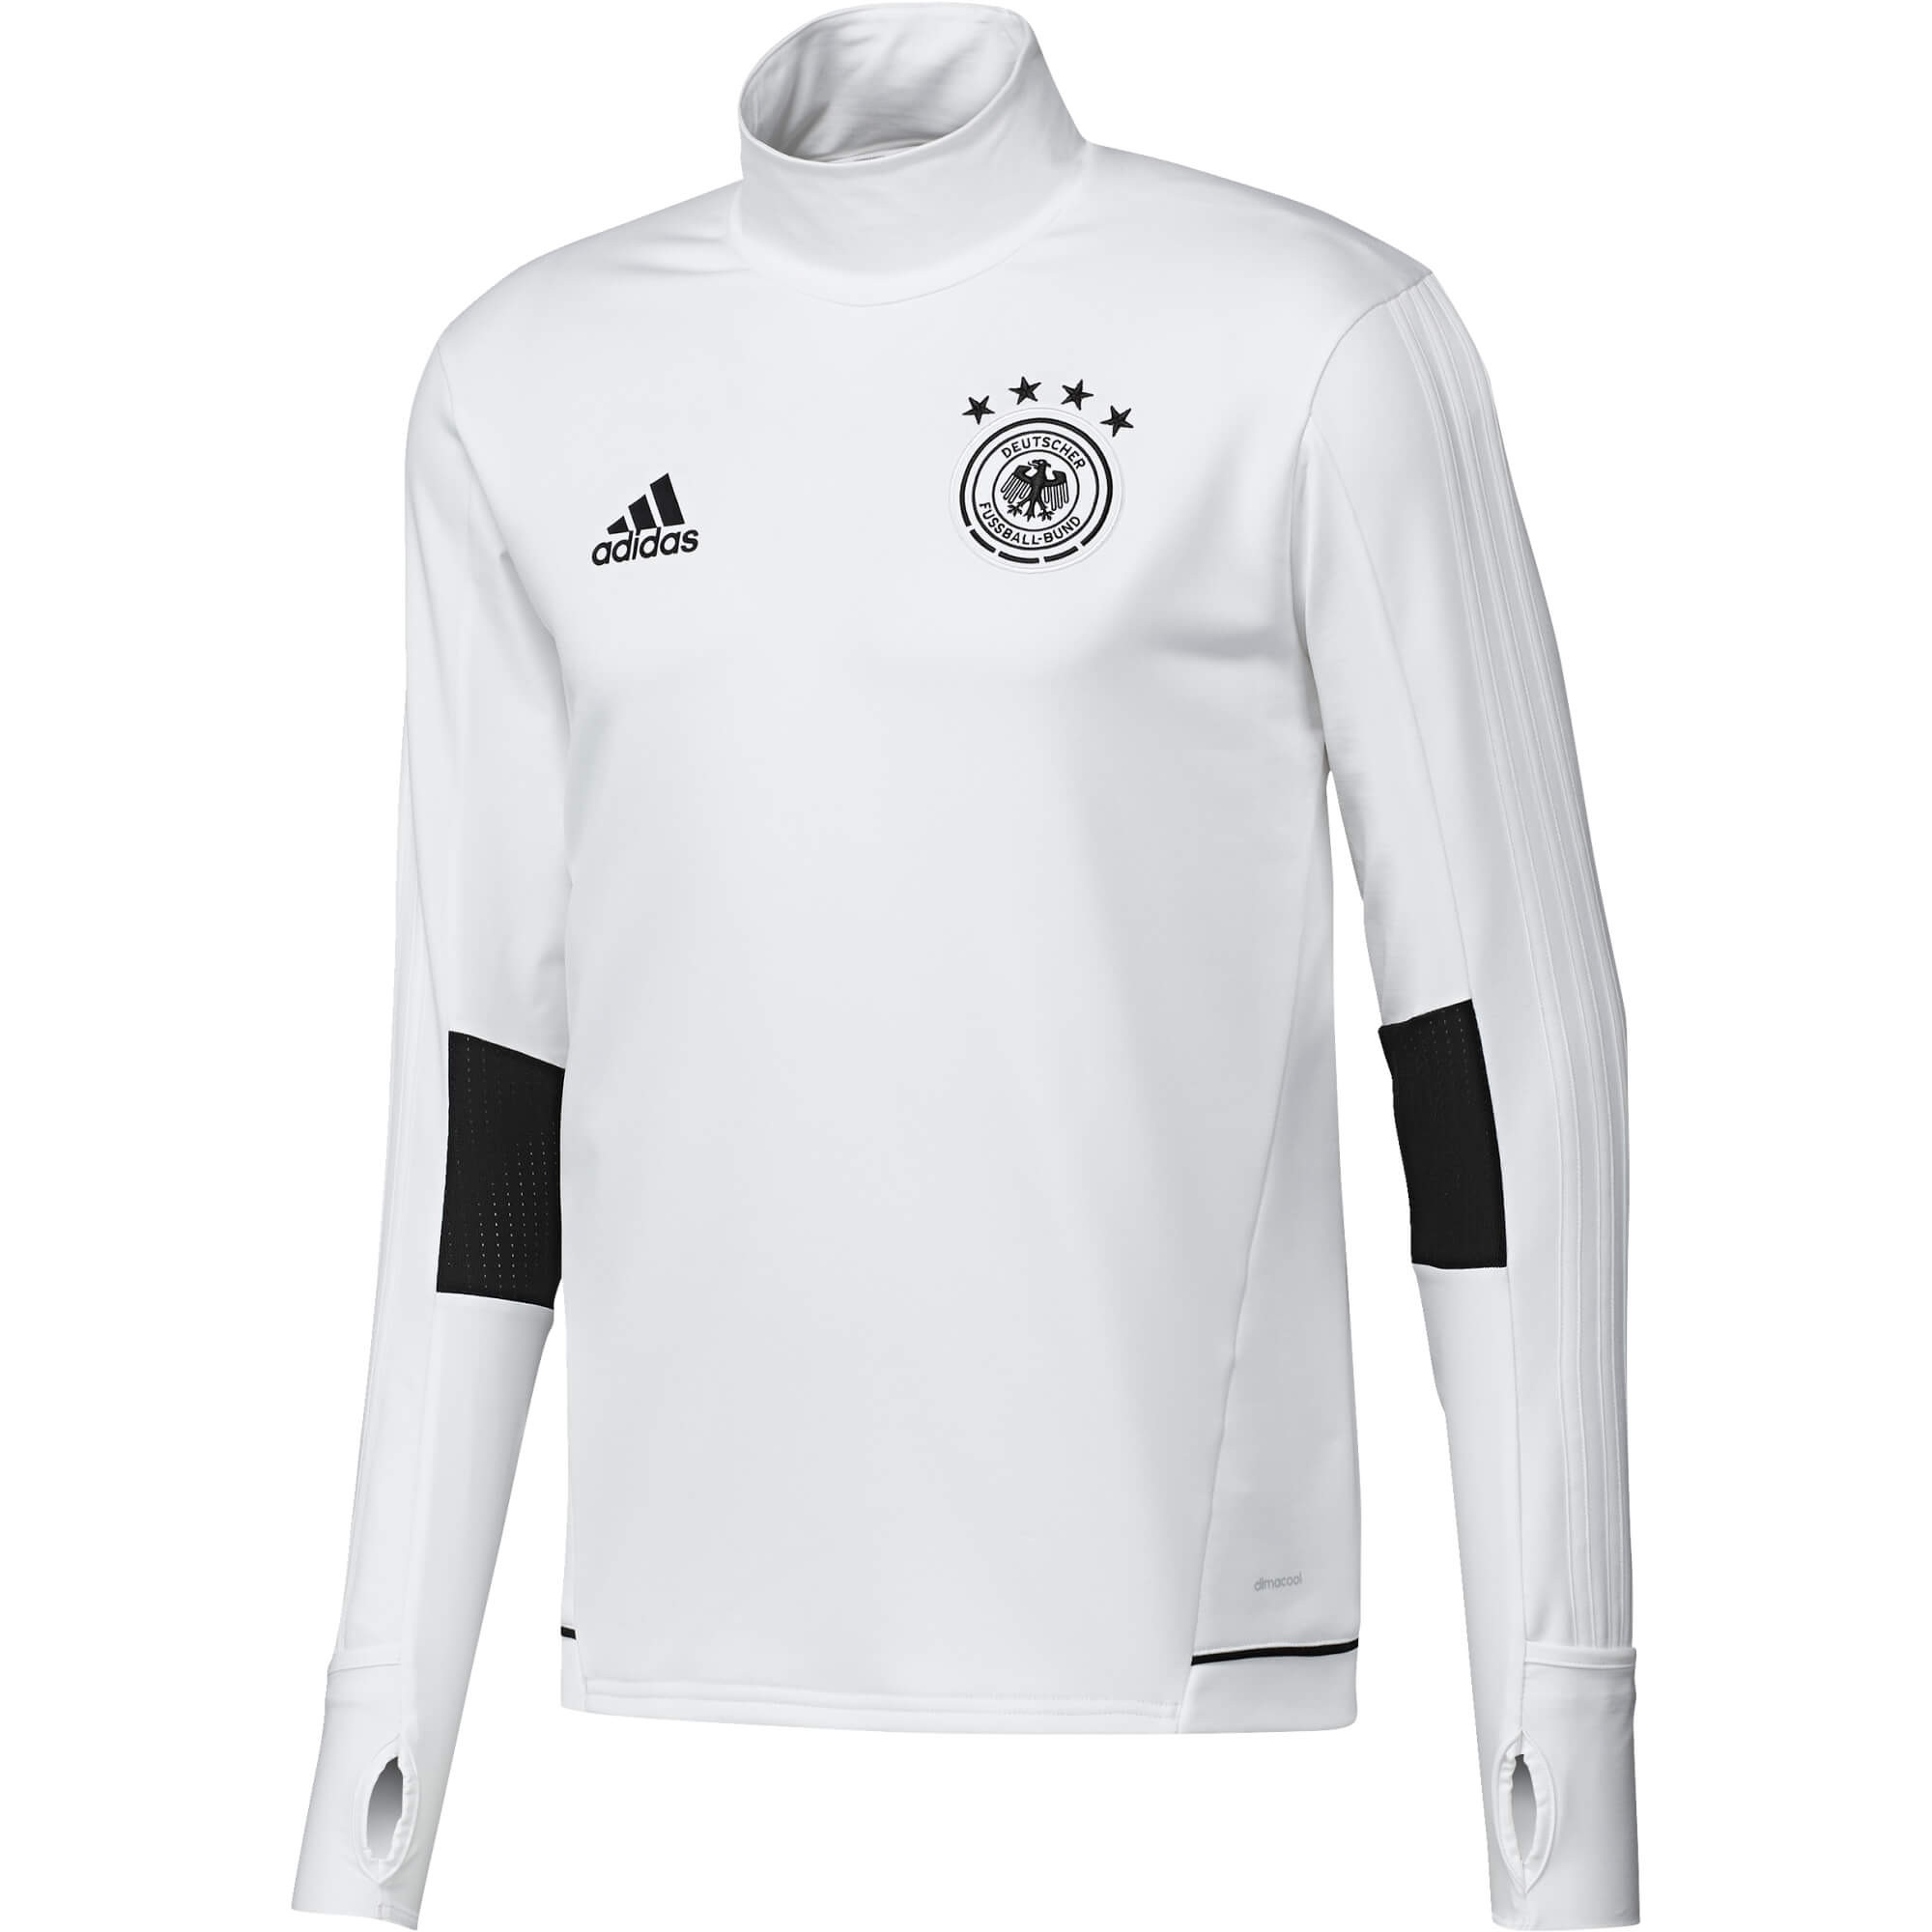 ADIDAS ALLEMAGNE TRG TOP BLANC 2017/2018